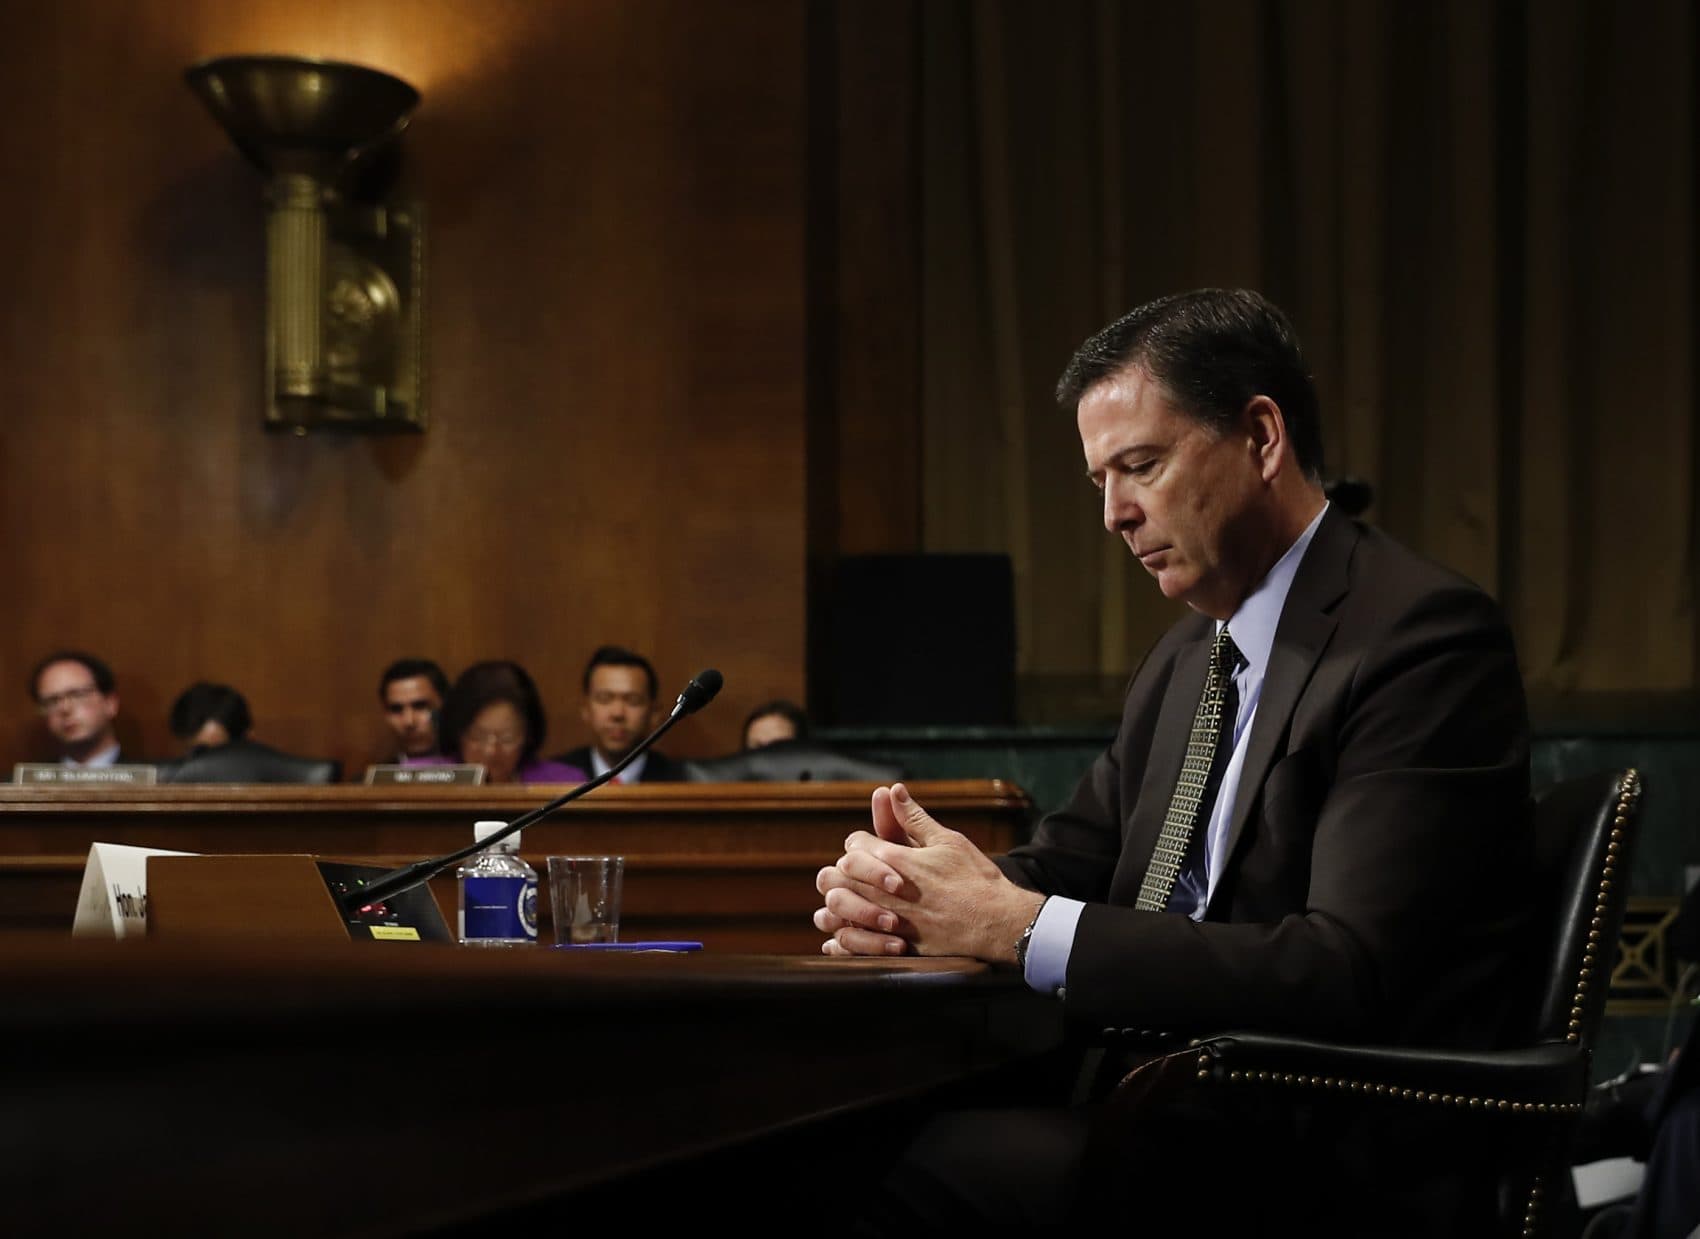 Congressional Republicans must confront whether they are willing to defend a corrupt president, or the institutions of American democracy, writes Steve Almond. Pictured: On Wednesday, May 3, 2017, then-FBI Director James Comey pauses as he testifies on Capitol Hill before a Senate Judiciary Committee hearing. President Donald Trump abruptly fired Comey on May 9. (Carolyn Kaster/AP)